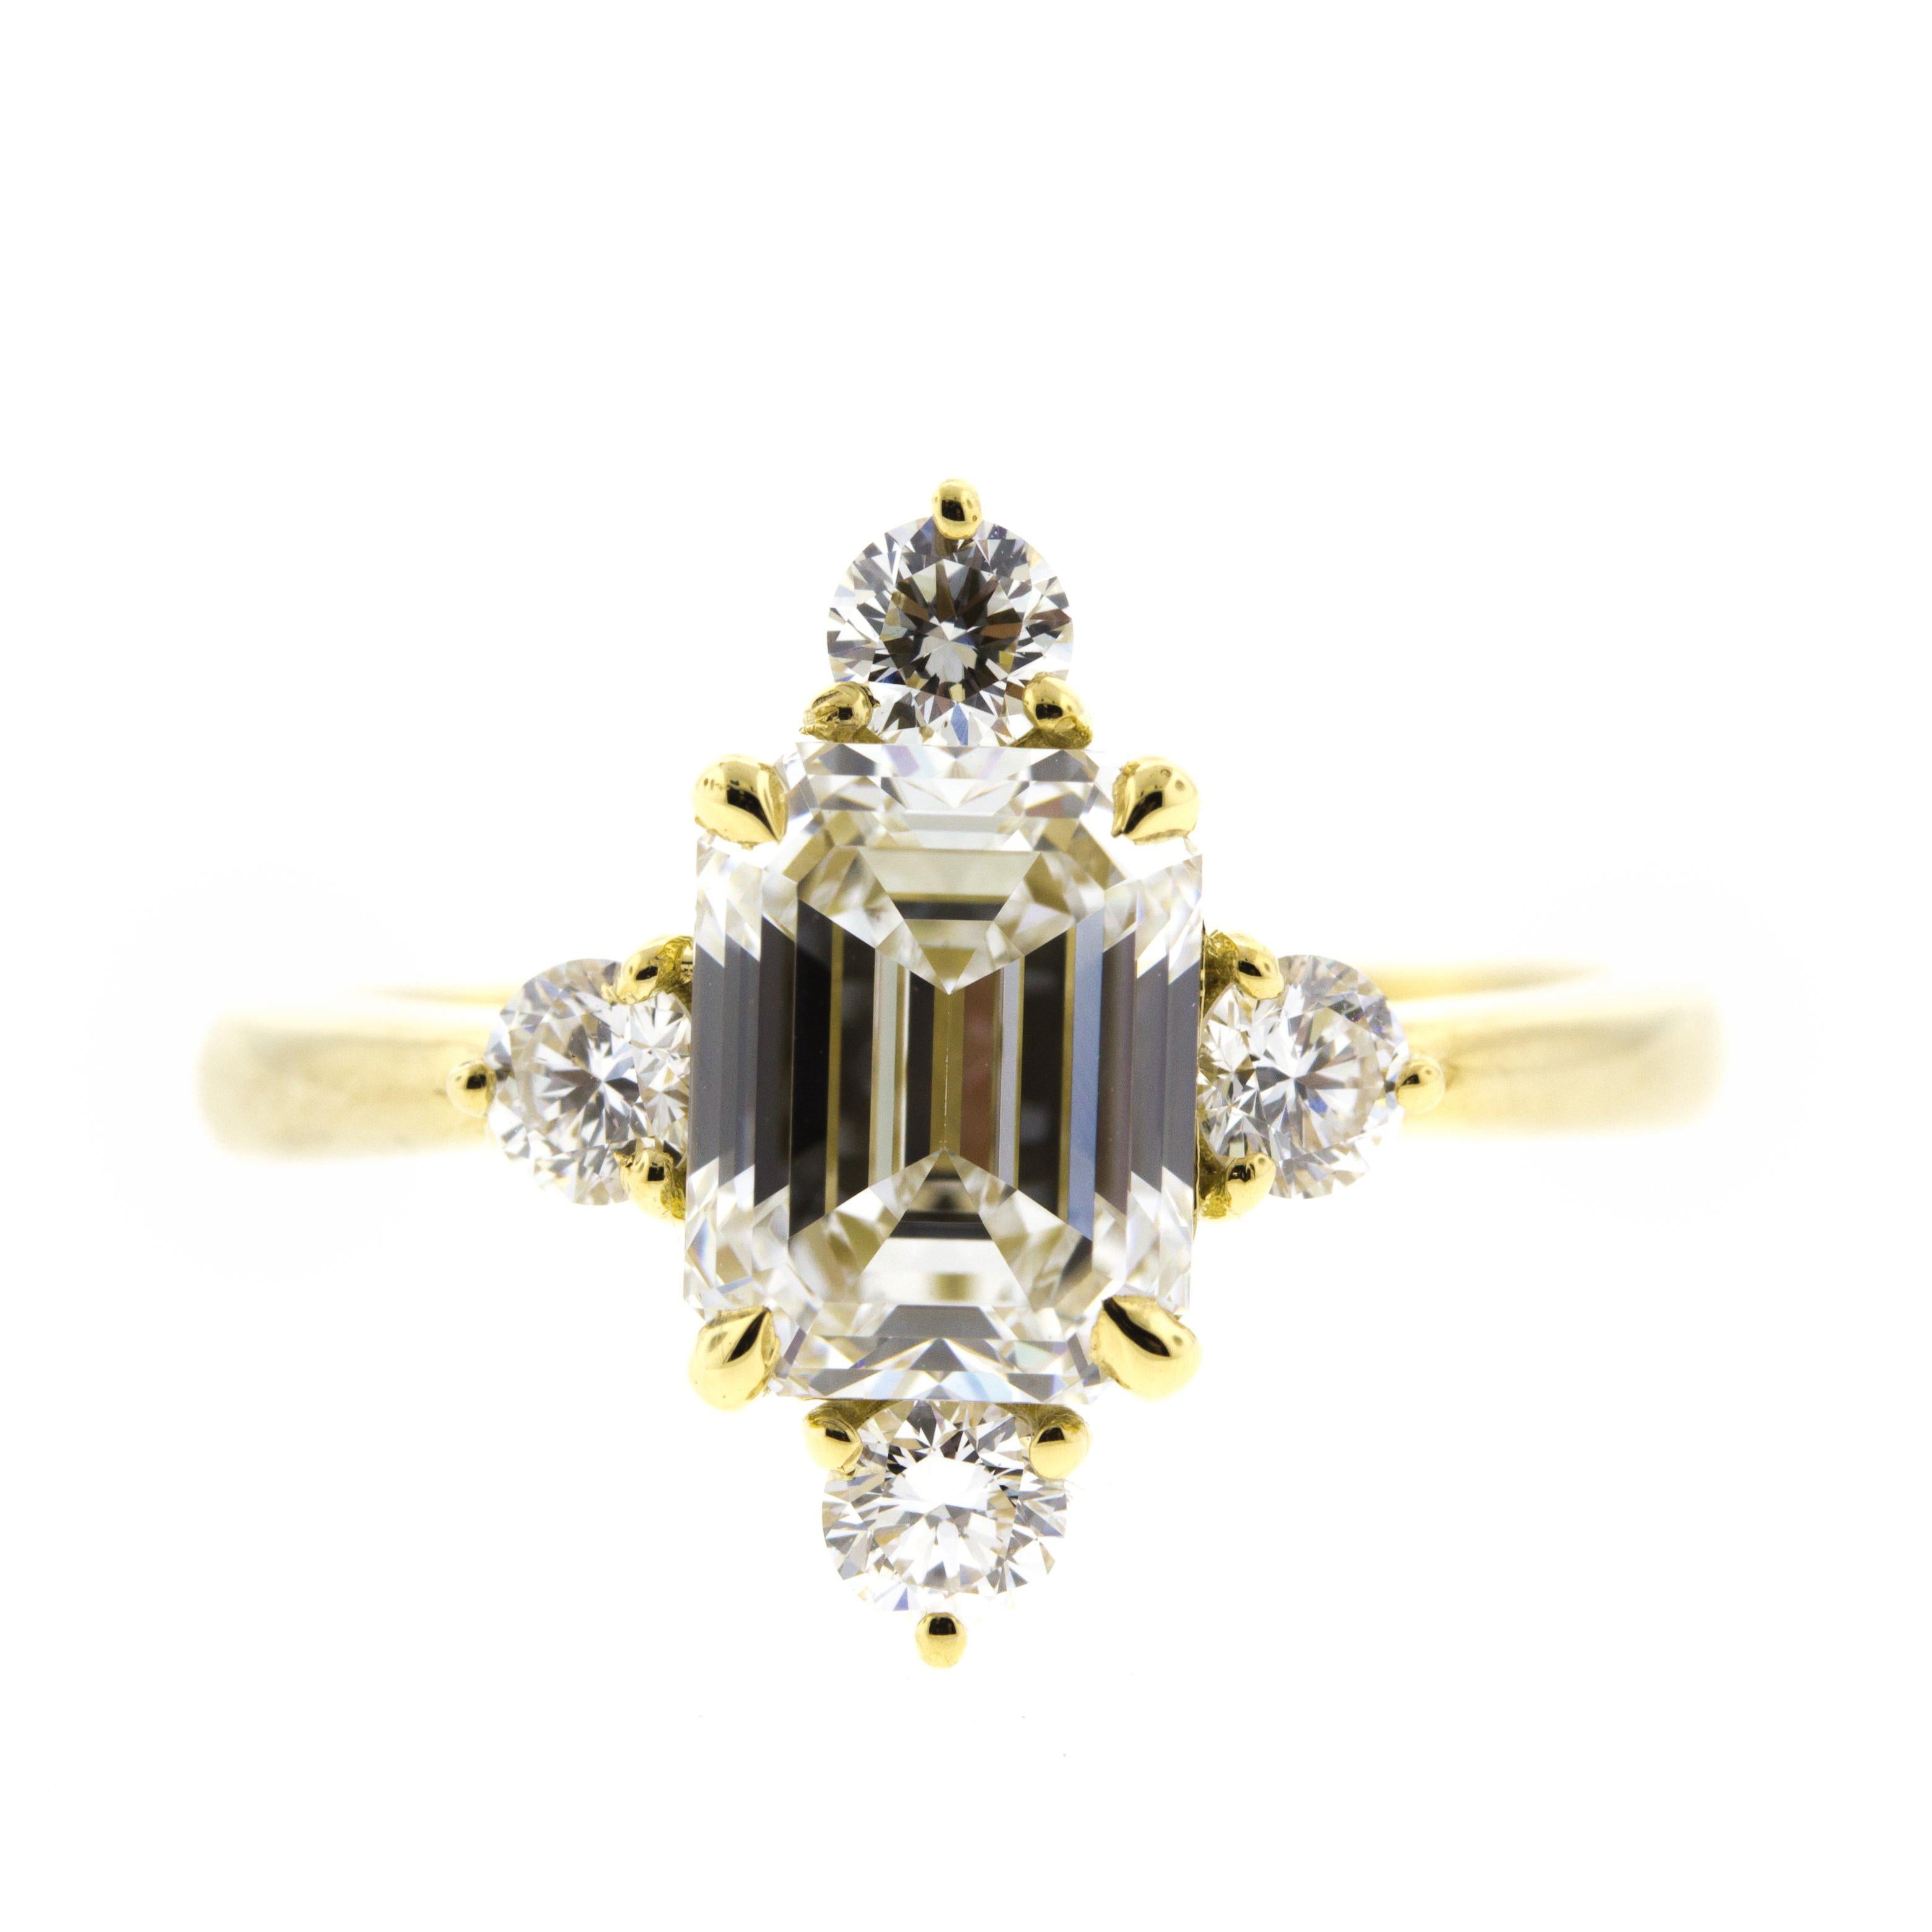 Emerald Cut Diamond Engagement Ring in Yellow Gold 'GIA'